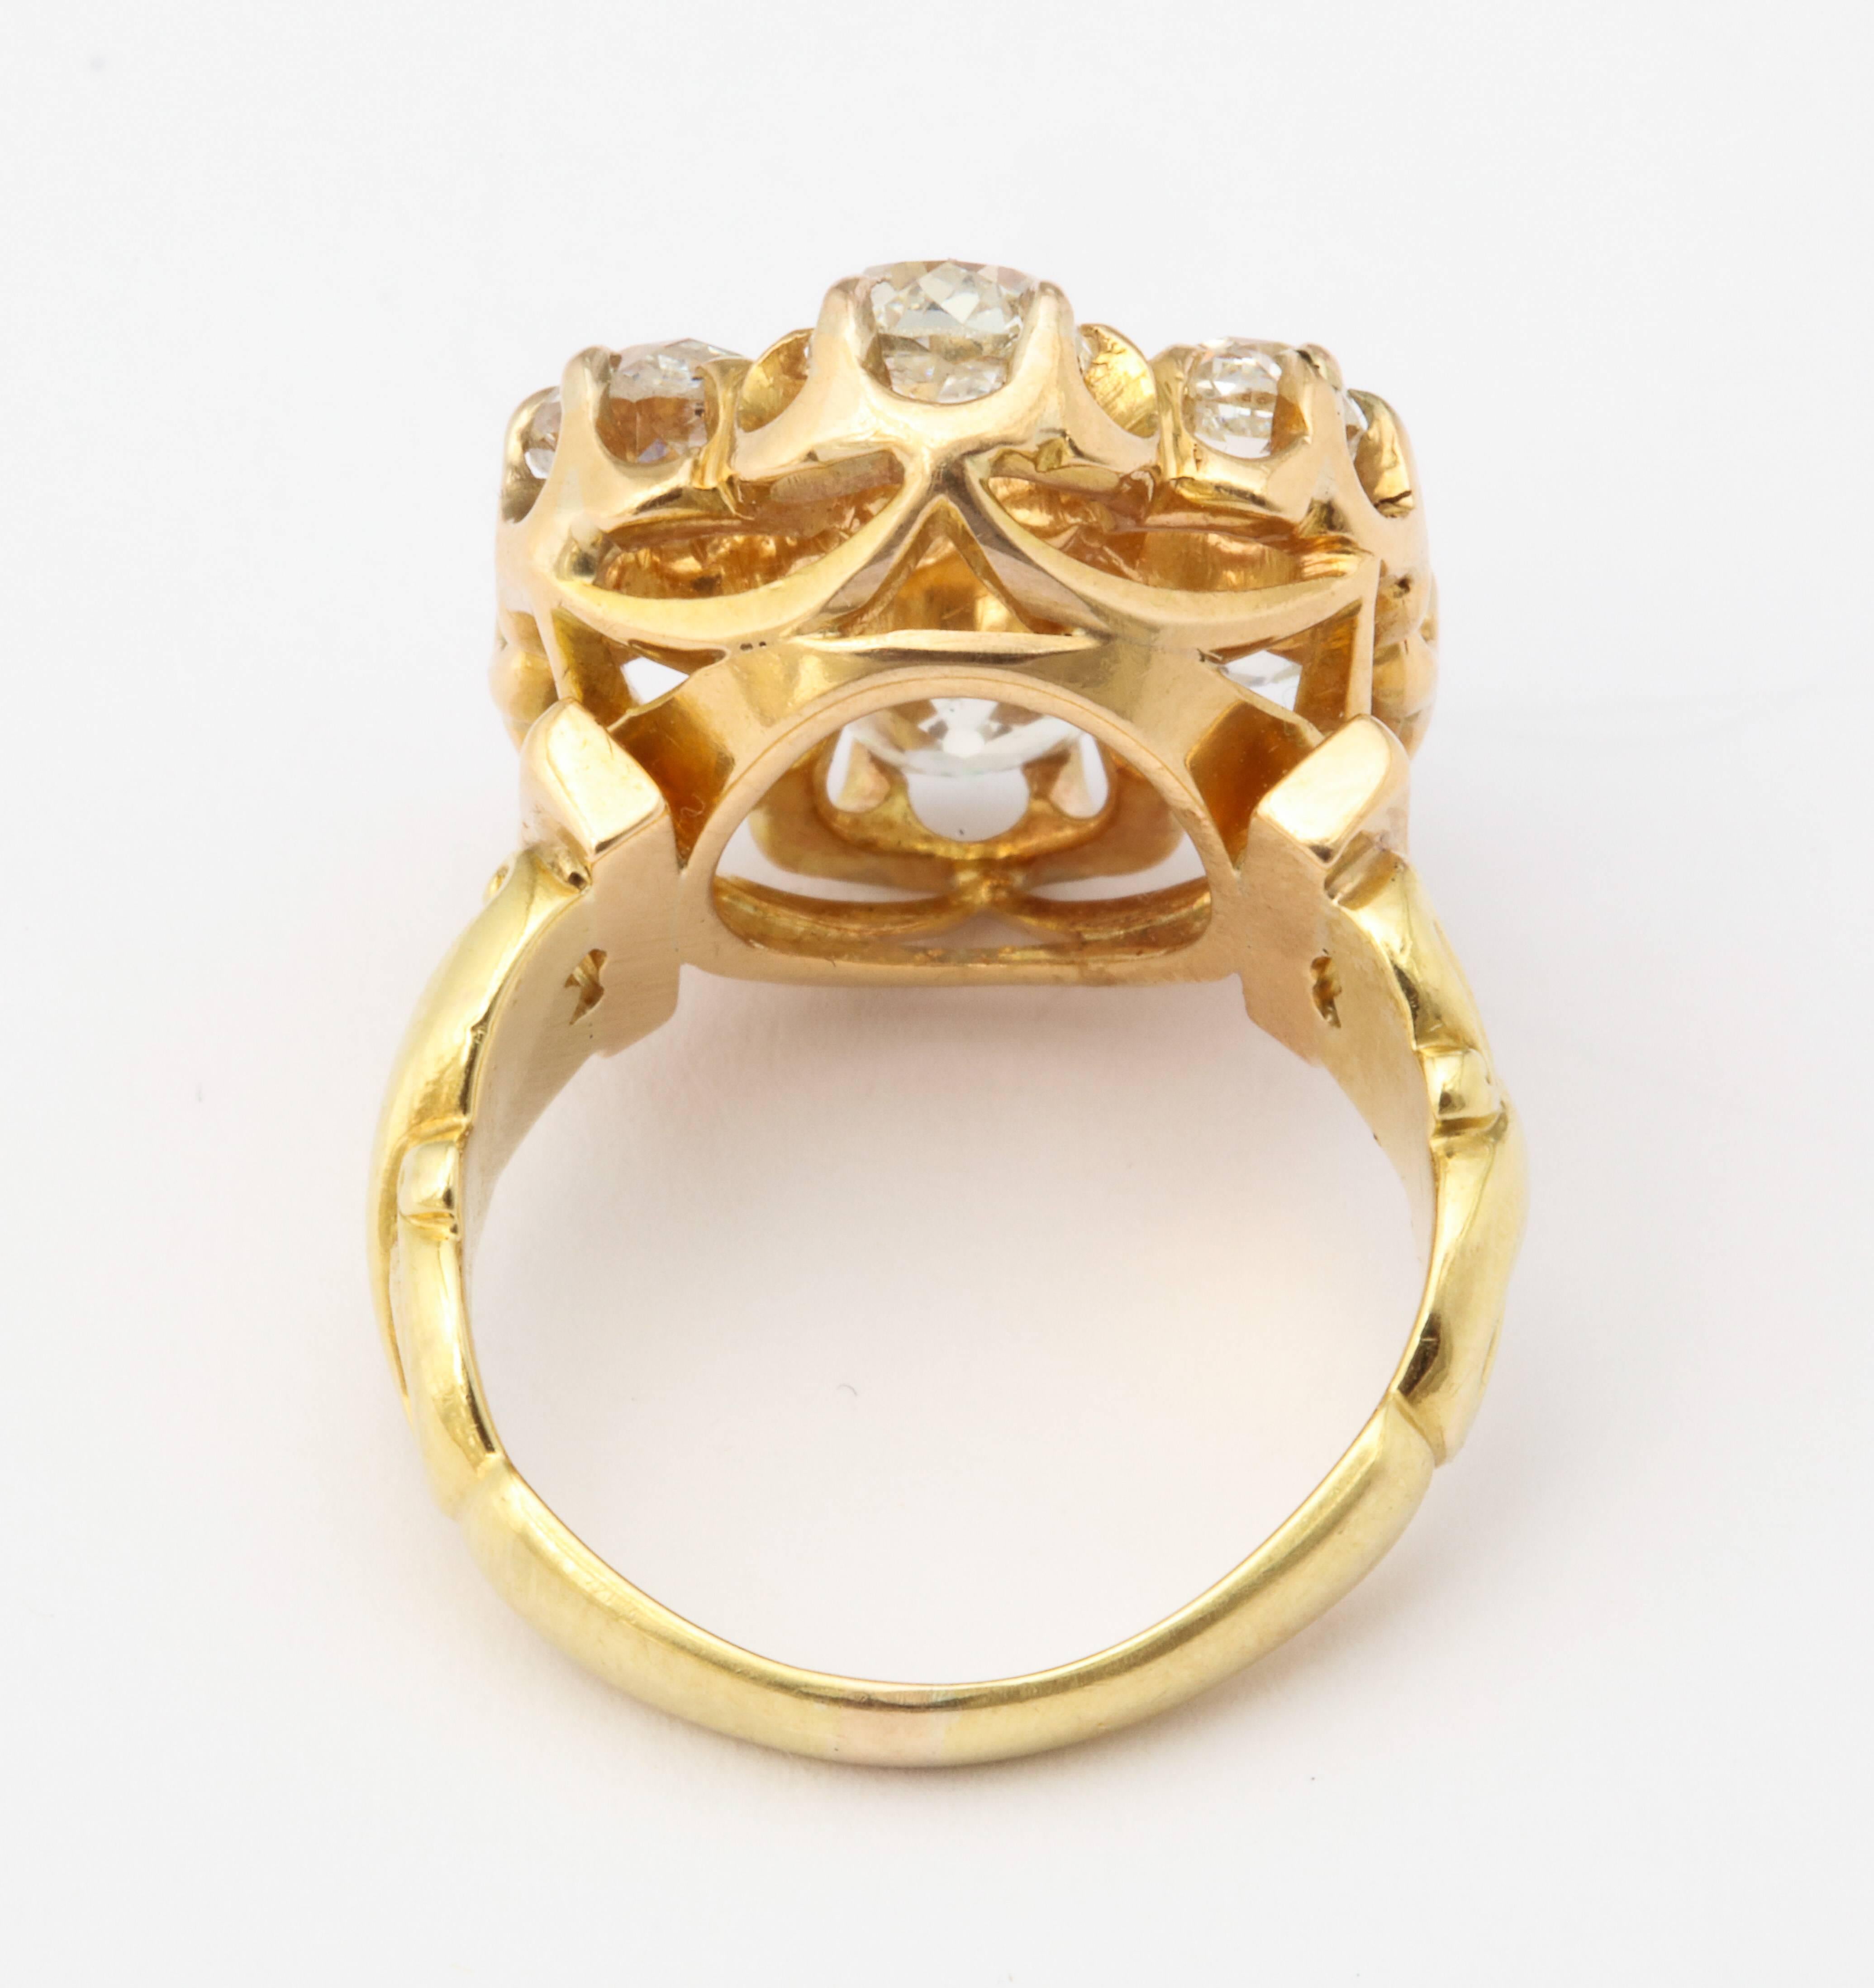 Old Mine Diamond Ring, 18 Karat Victorian In Excellent Condition For Sale In Stamford, CT